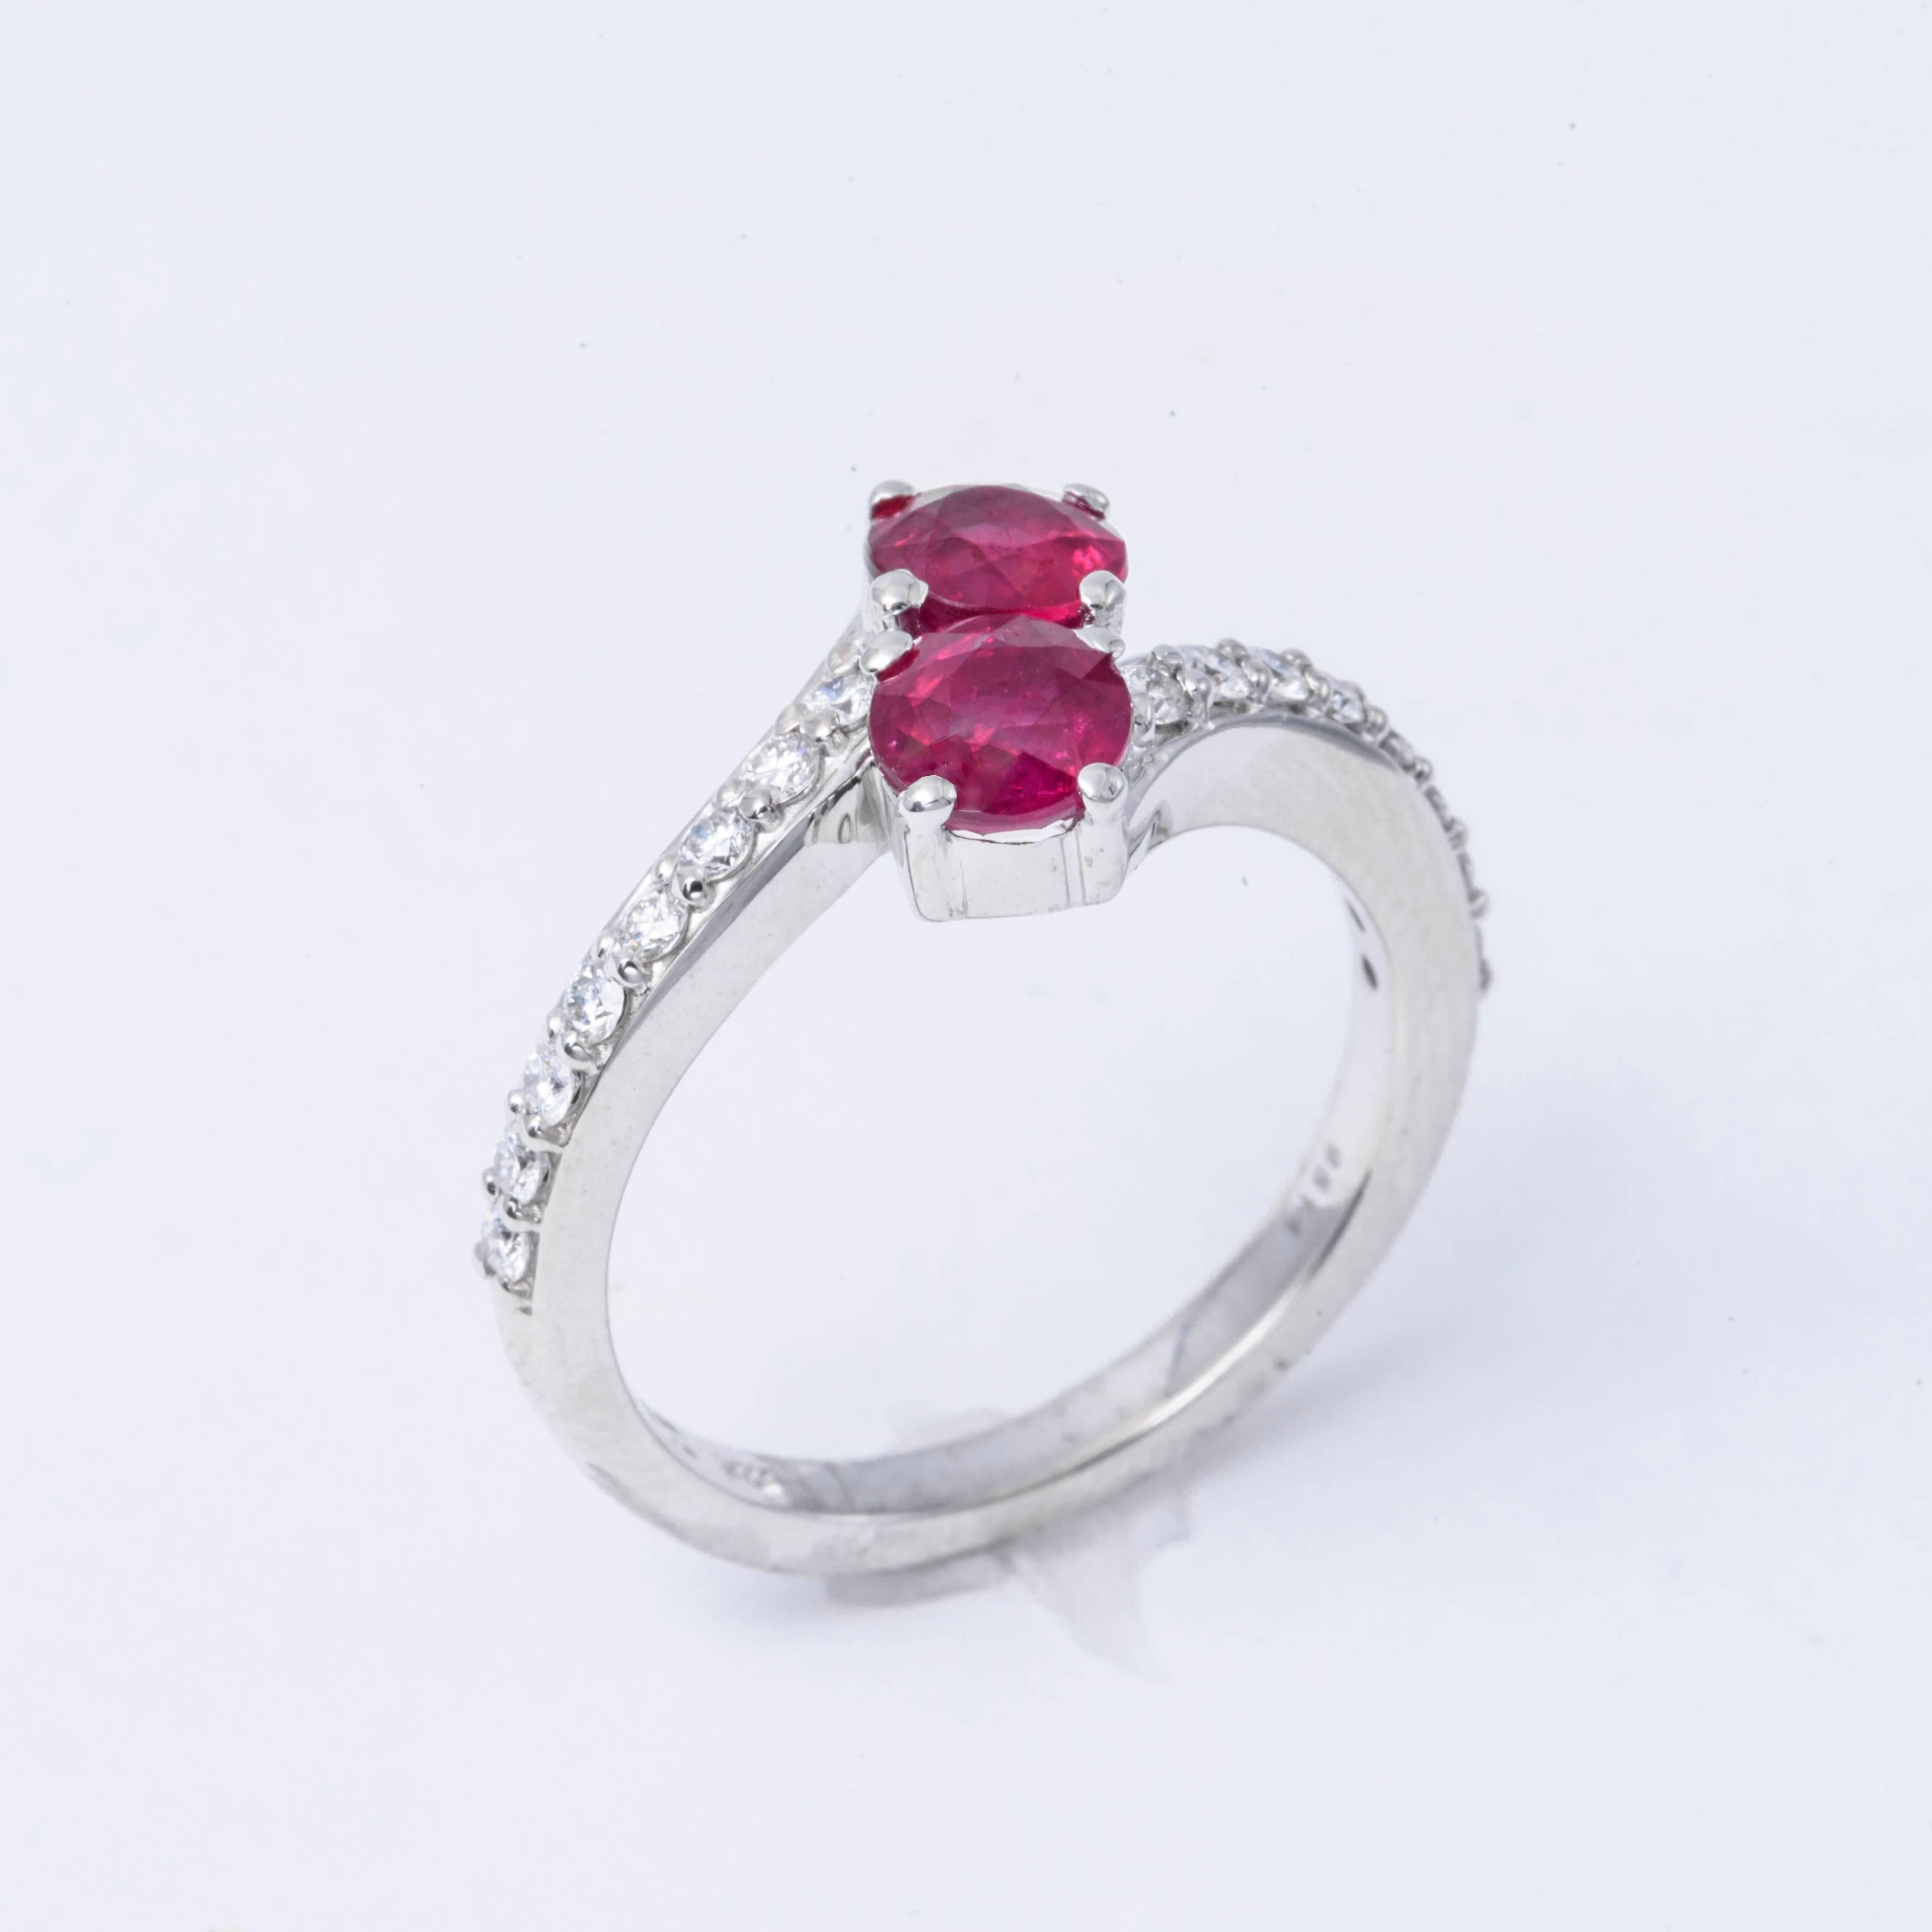 14 K White Gold Ring featuring 2 Ruby's for a total weight of  1.59 Cts.
The Diamonds weight is 0.34 cts. Color : G Clarity: Si1-+Si2
One of a kind ring, very well made 
The diamonds are perfectly matched